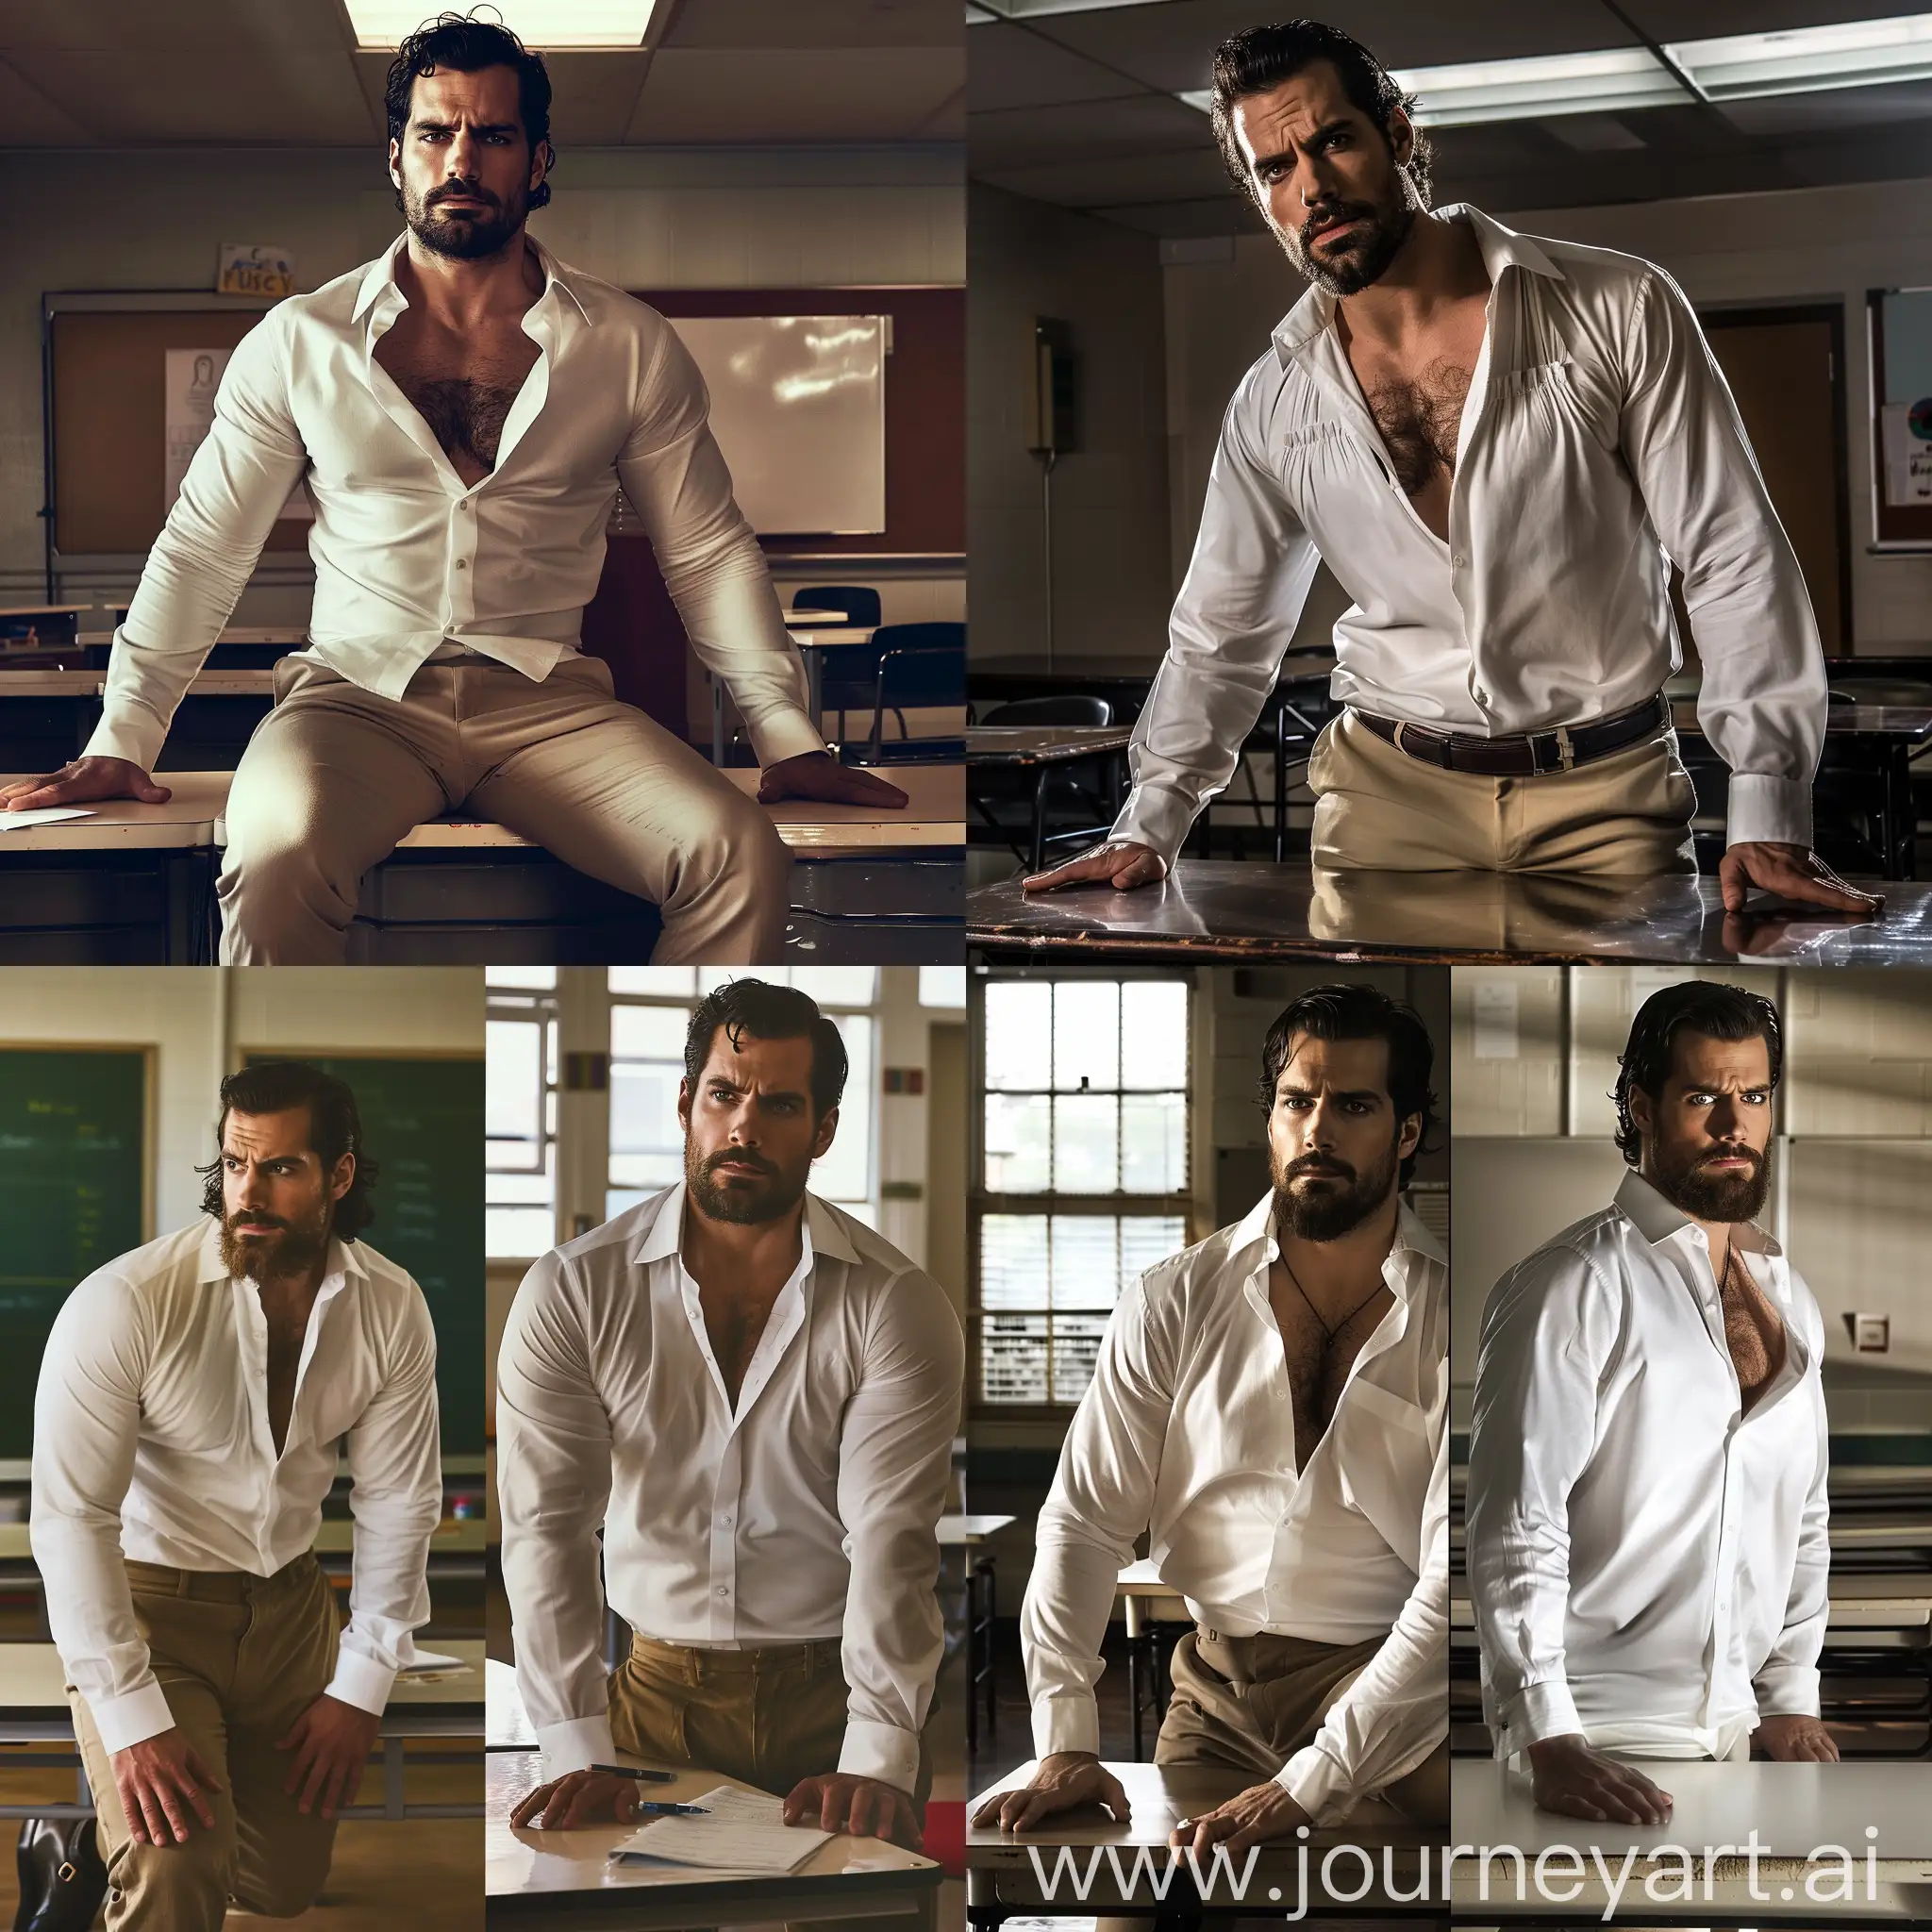 Muscular-Henry-Cavill-Teaches-in-Classroom-Setting-with-Cinematic-Lighting